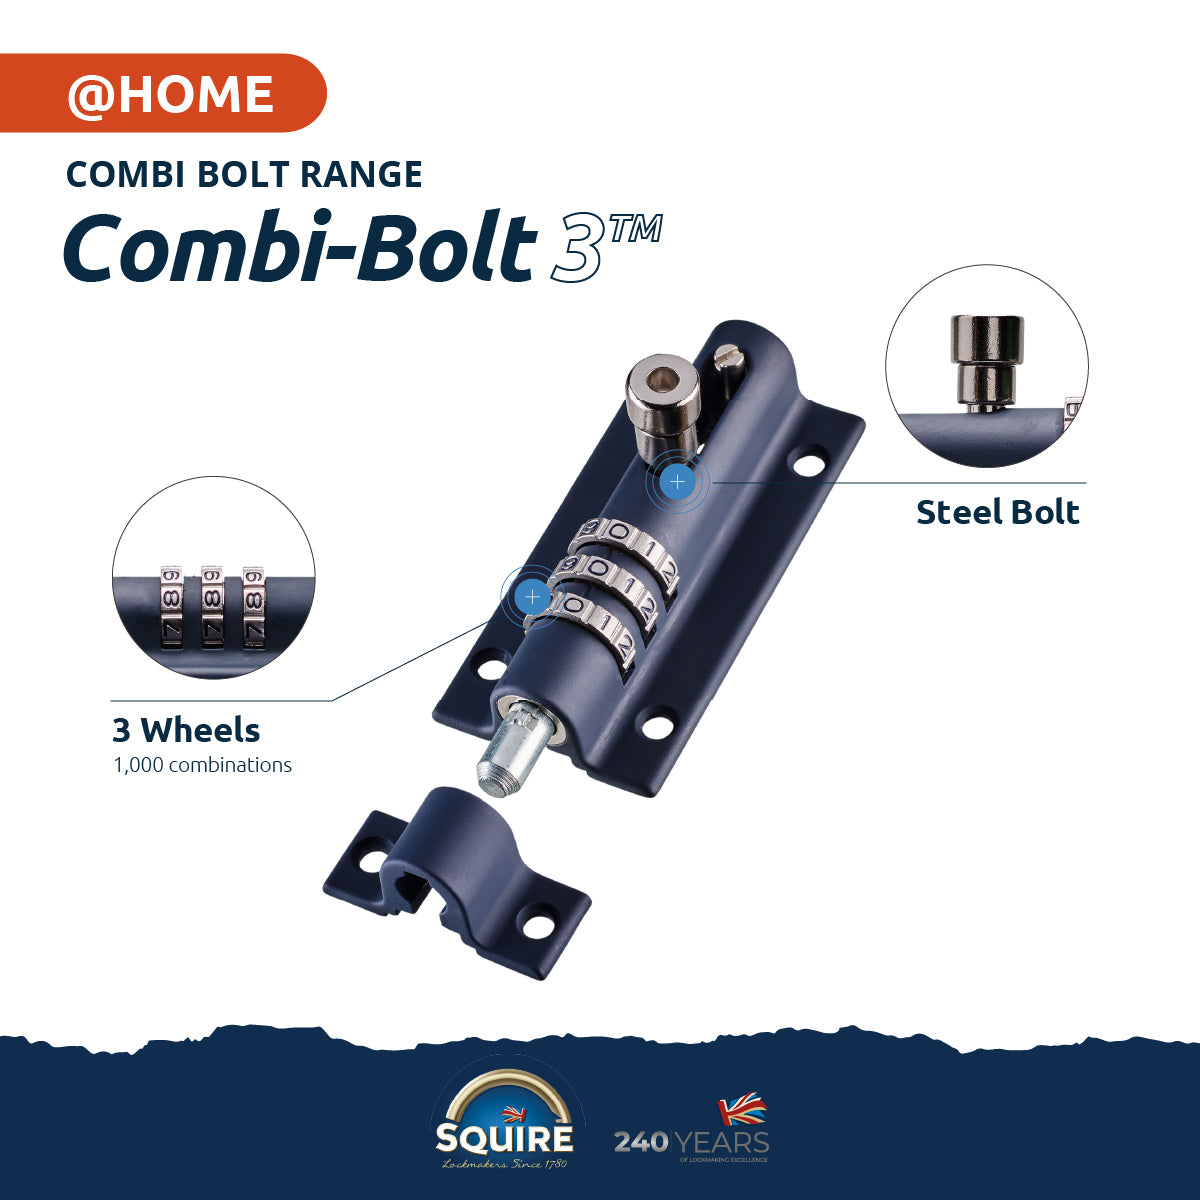 Combi-Bolt Product Specifications 2